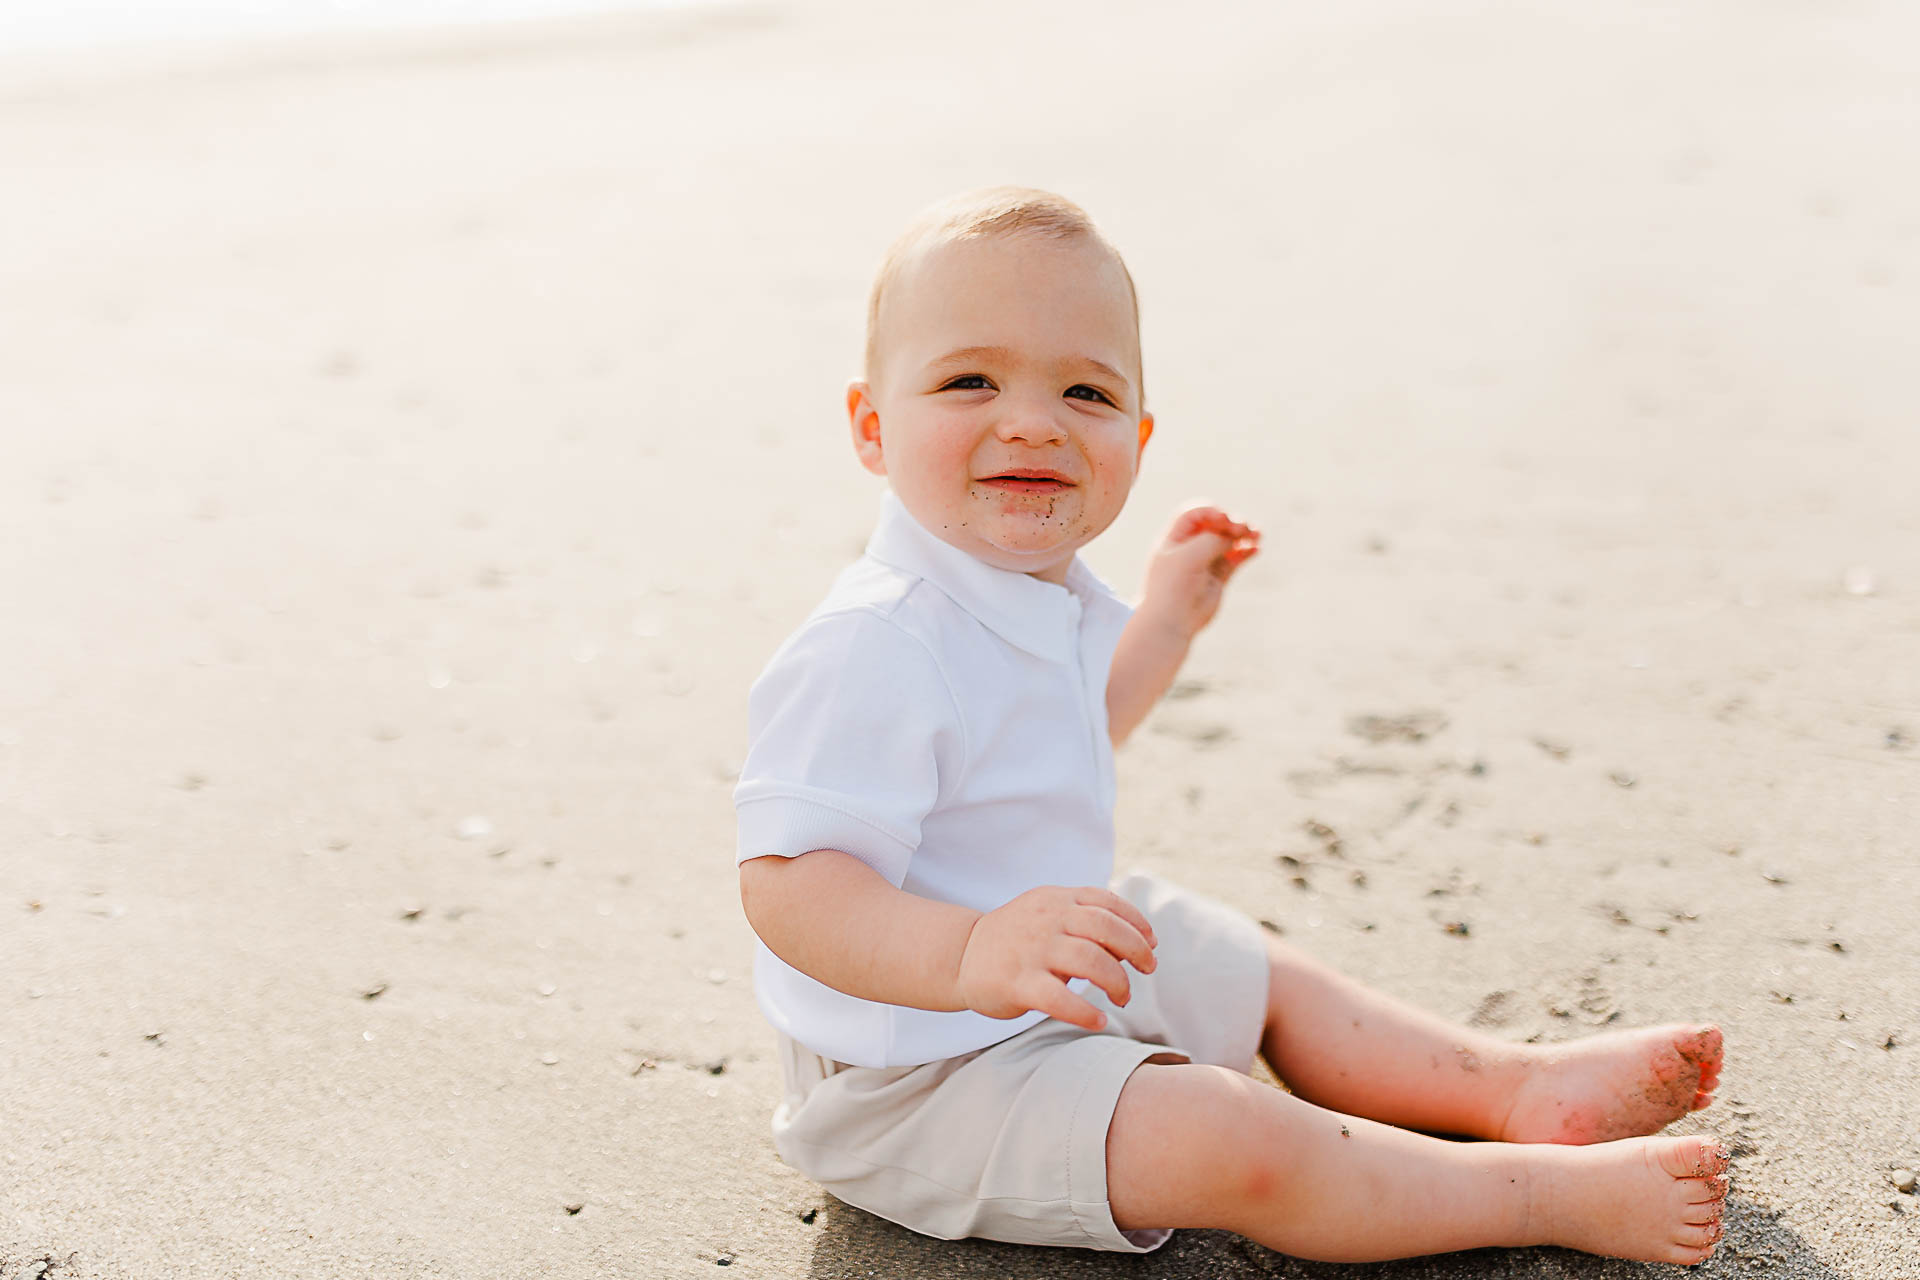 Photo by Scituate Photographer Christina Runnals | Baby sitting on the beach